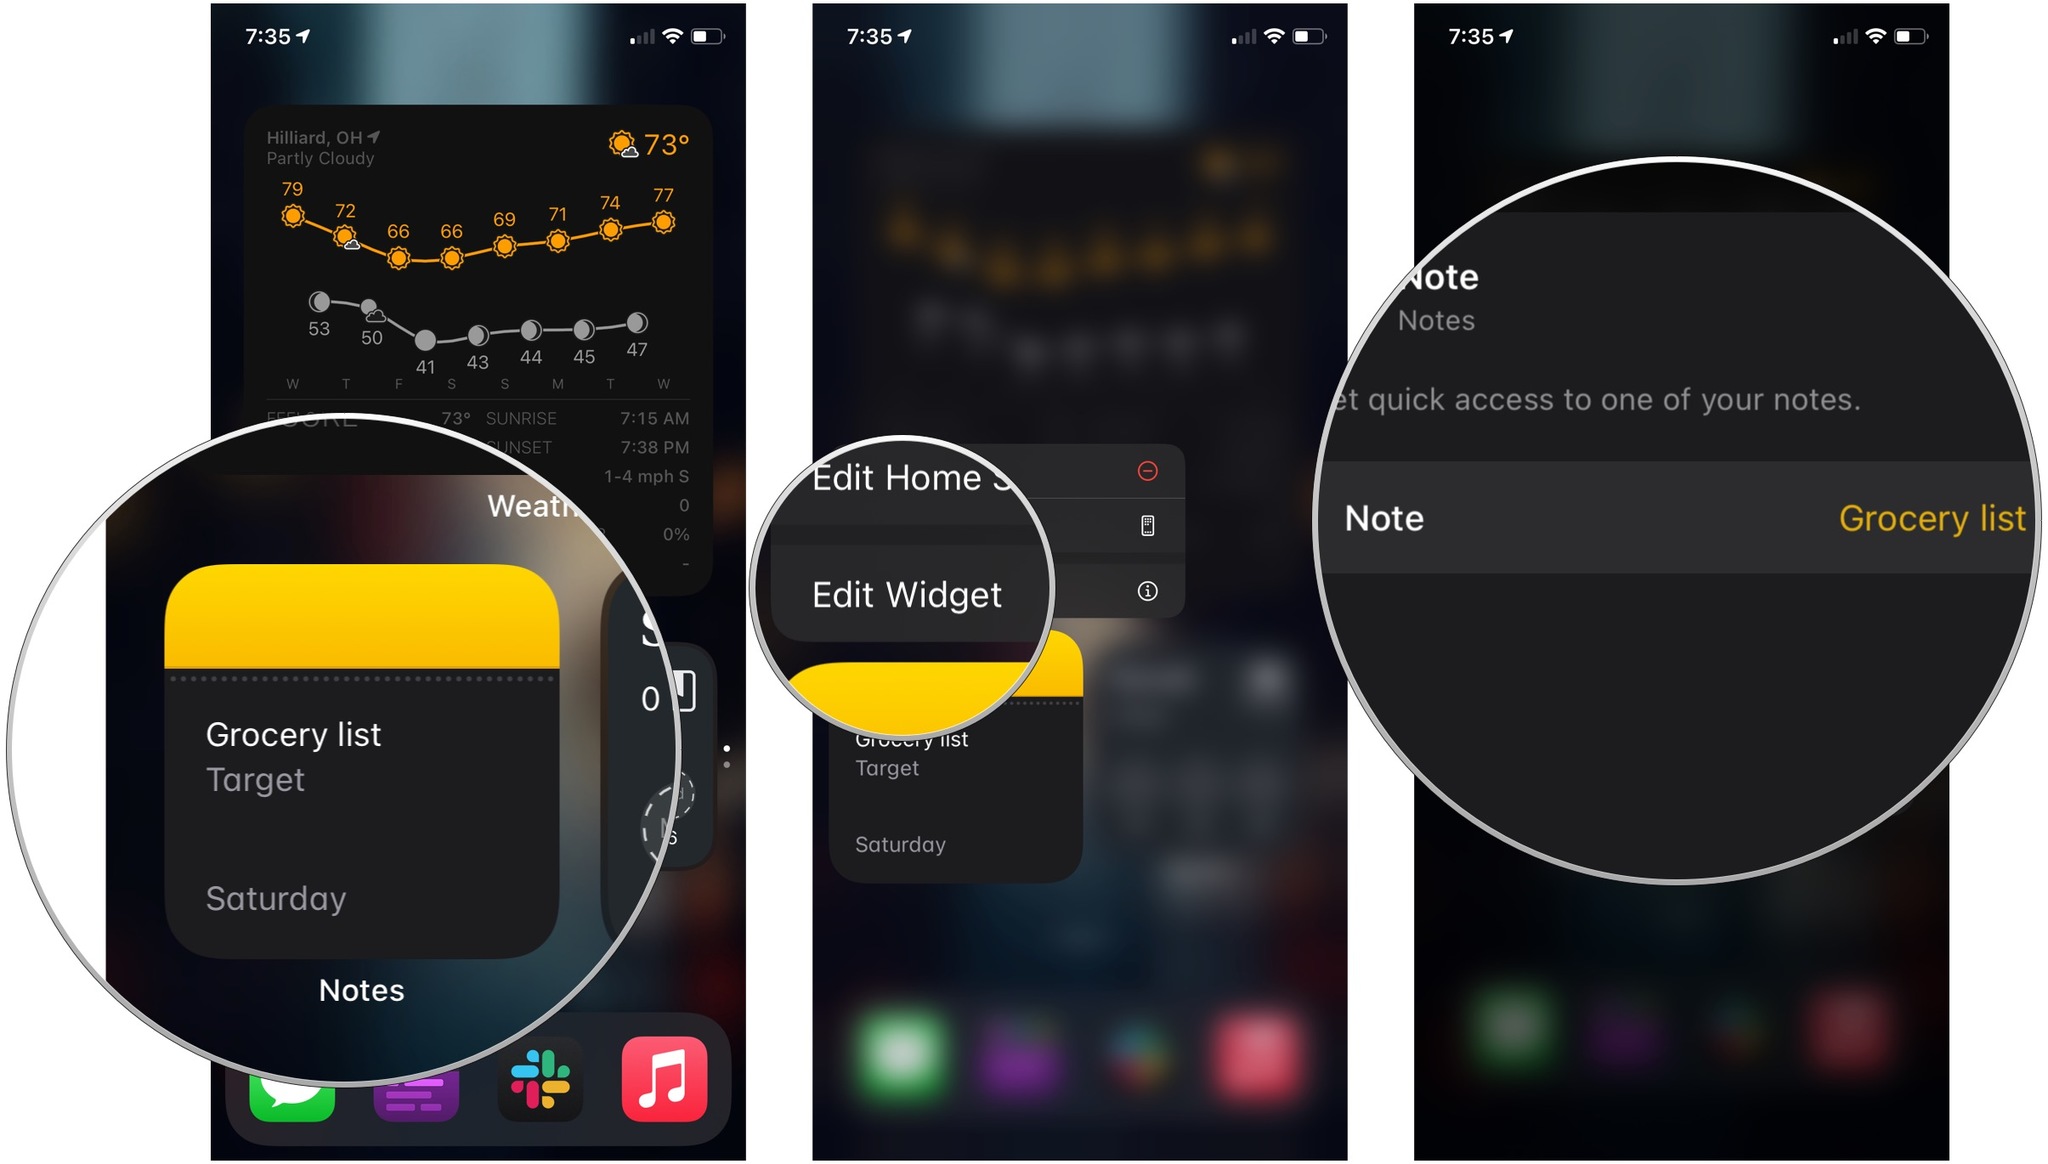 How to edit a widget, showing how to tap and hold a widget, then tap Edit Widget, then use the options to tune the widgets